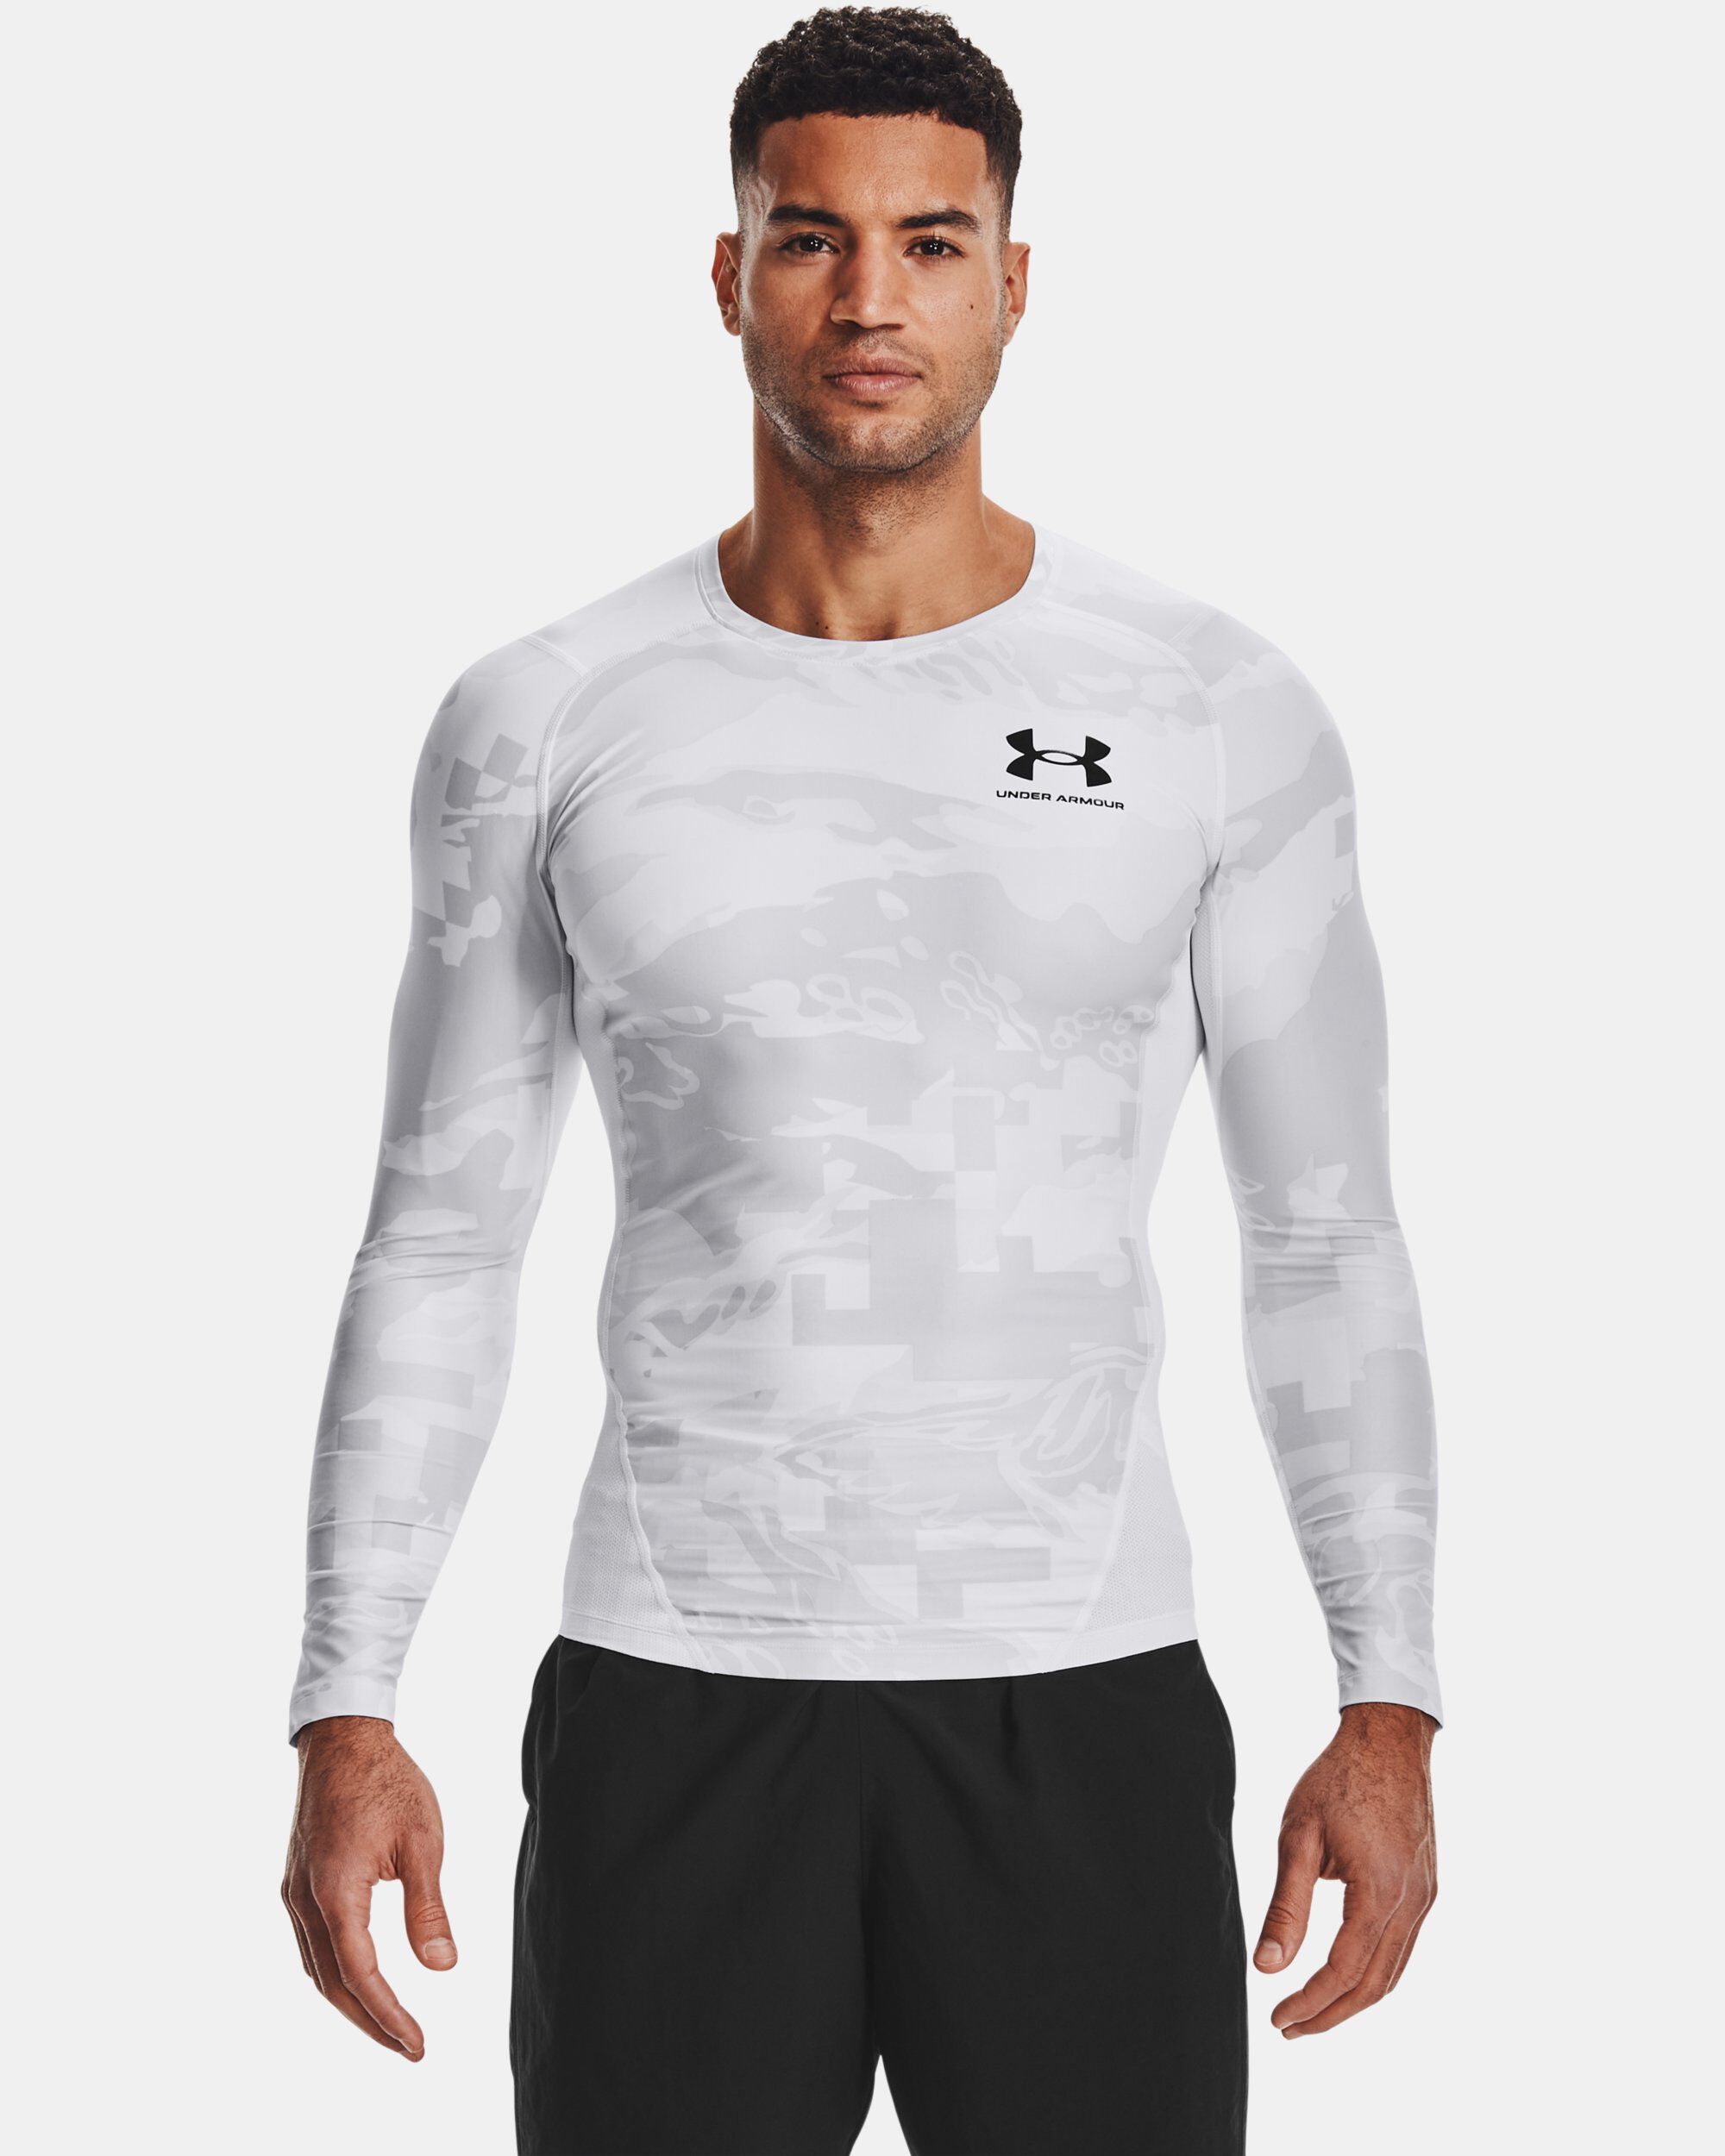 underarmour Compression Long Sleeve White – with fingers – Abdalla Store